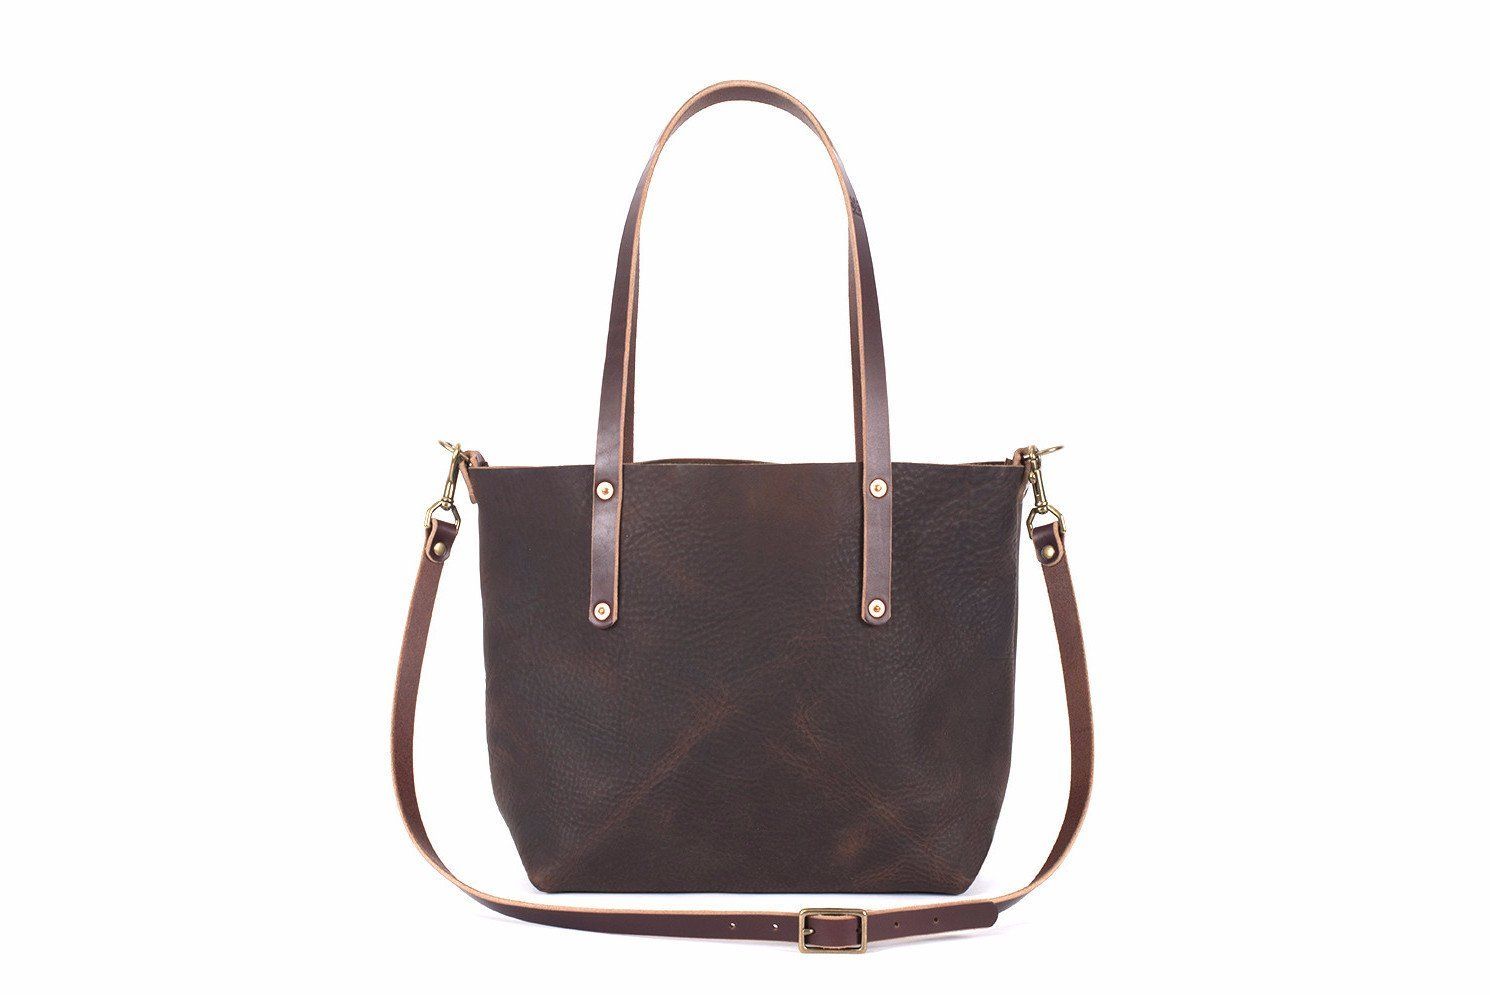 CROSSBODY STRAP ADD ON FOR AVERY TOTE